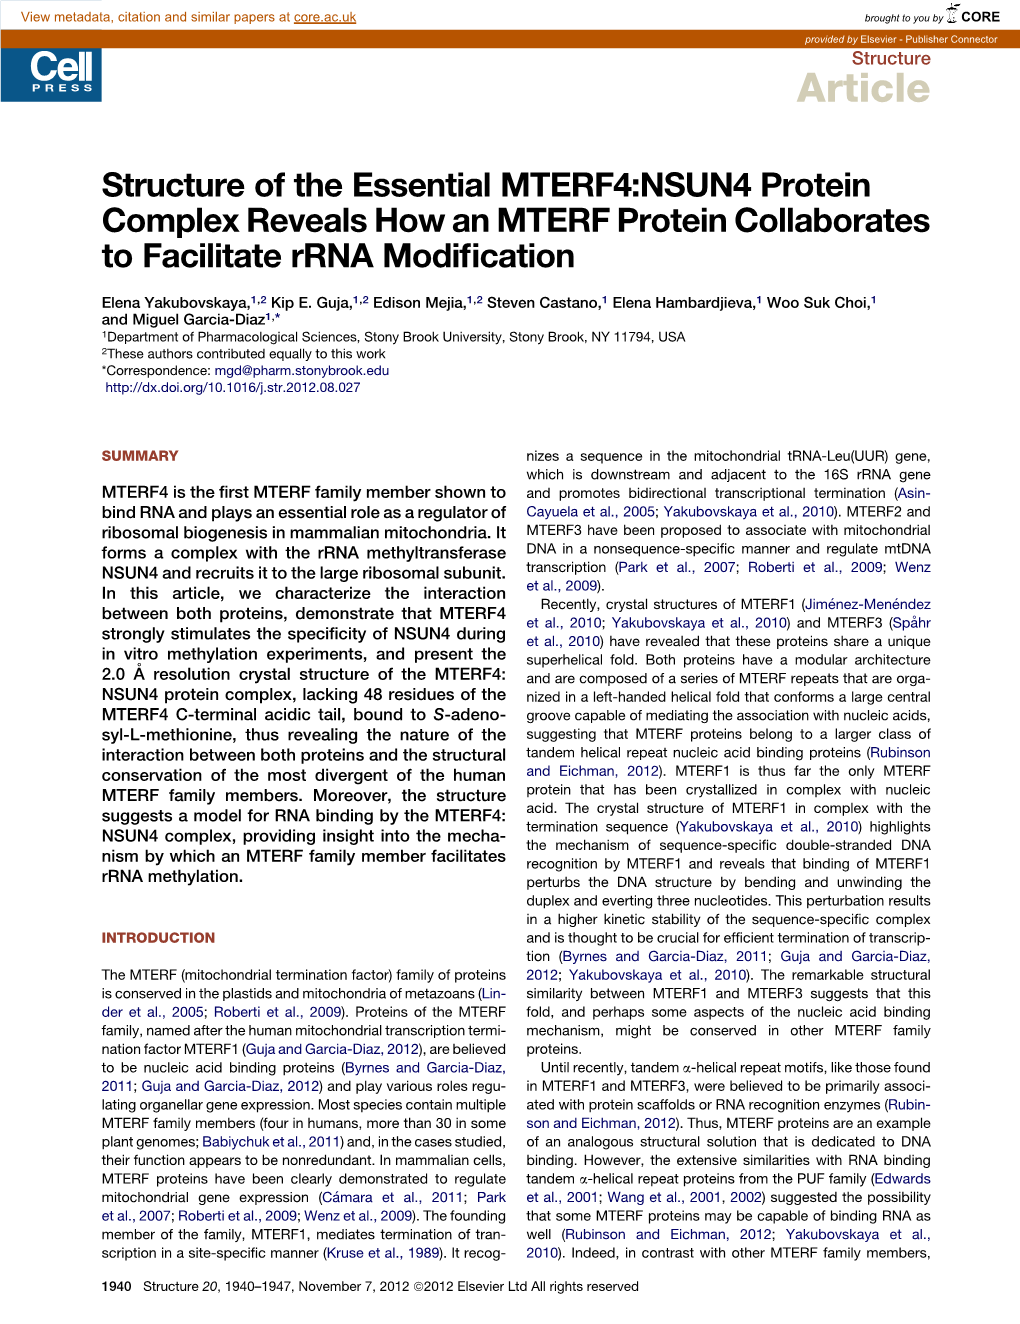 Structure of the Essential MTERF4:NSUN4 Protein Complex Reveals How an MTERF Protein Collaborates to Facilitate Rrna Modiﬁcation